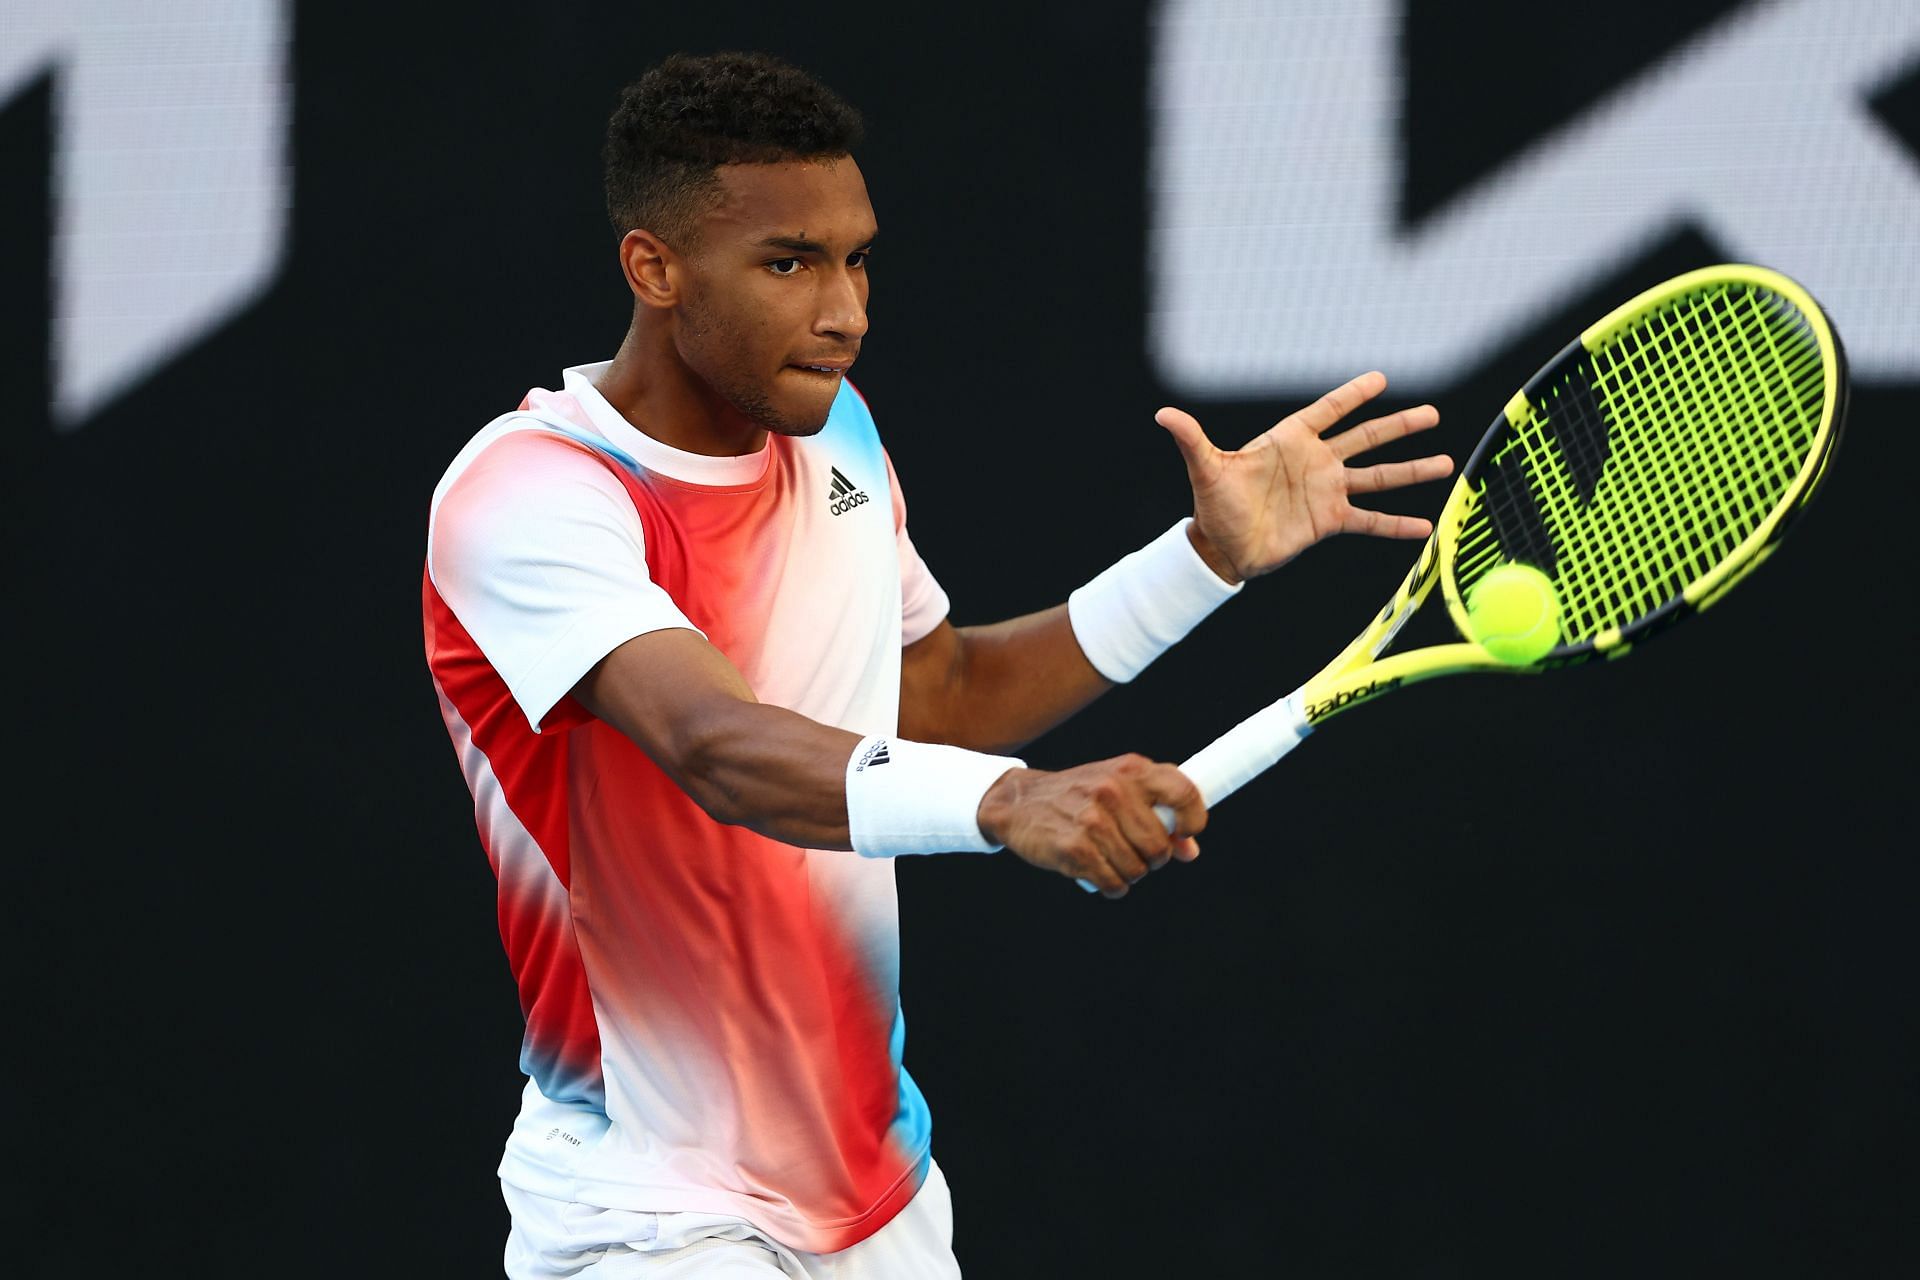 Felix Auger-Aliassime in action at the 2022 Australian Open